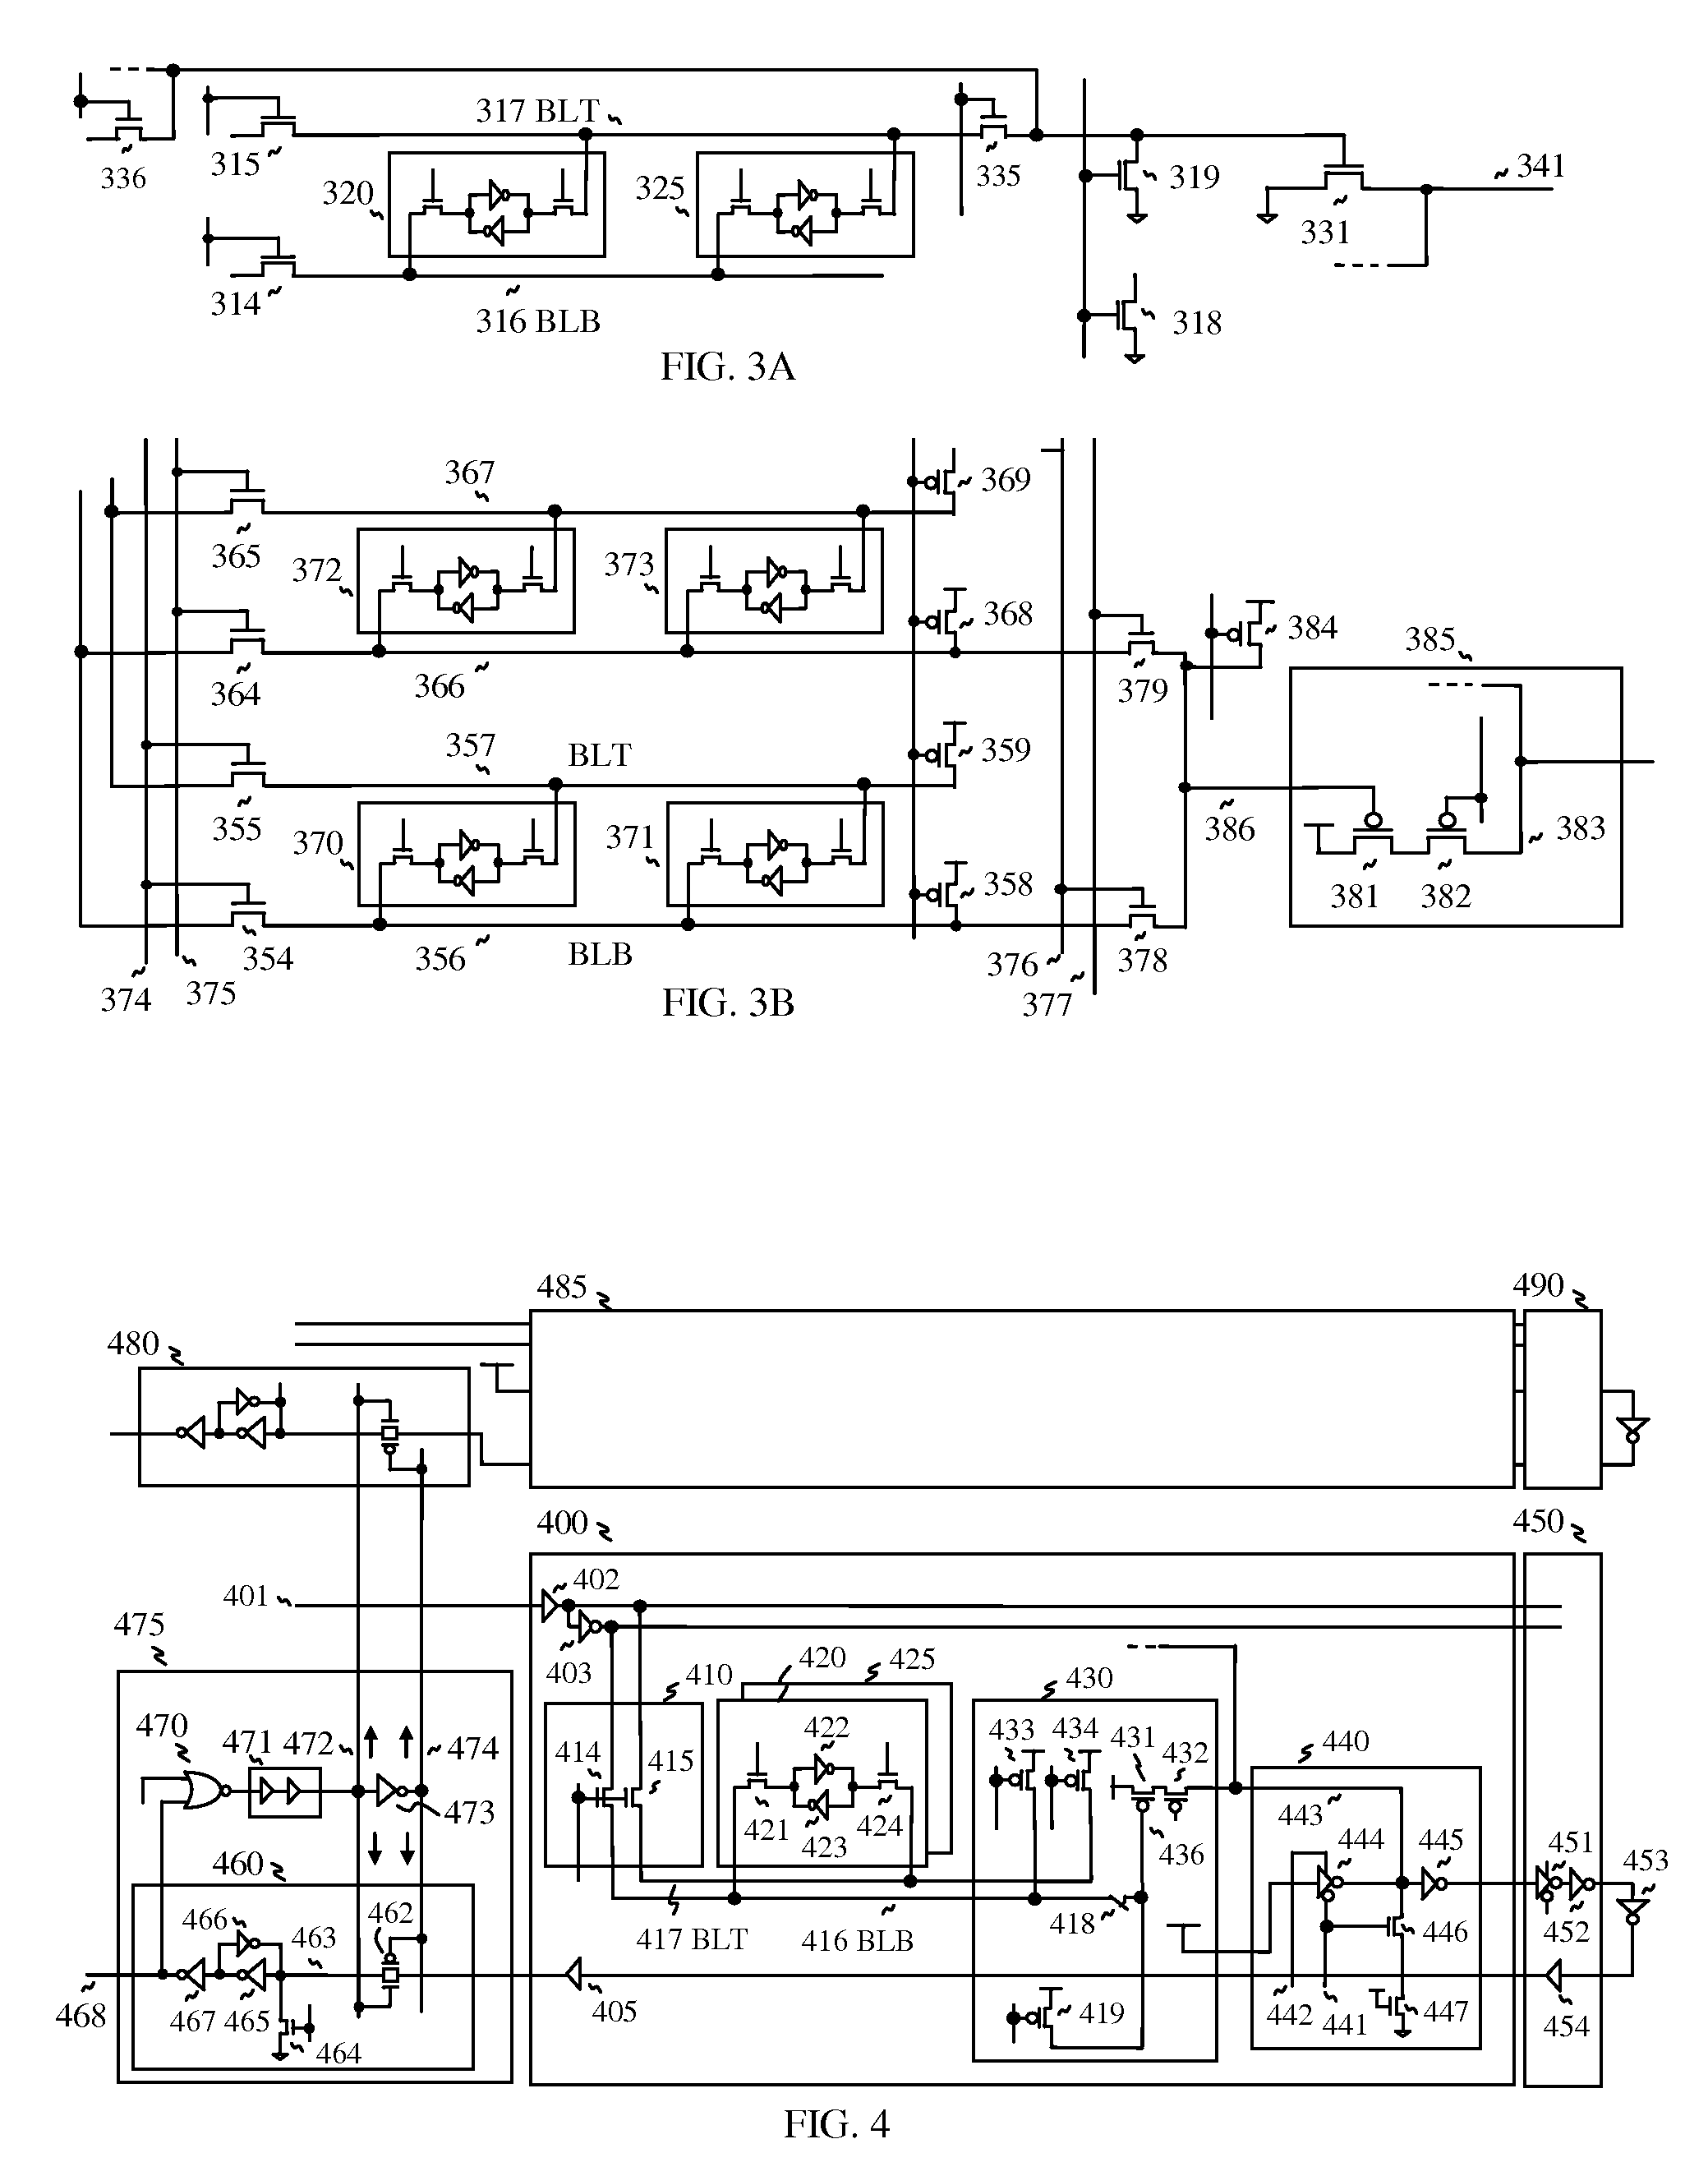 Stacked SRAM including segment read circuit